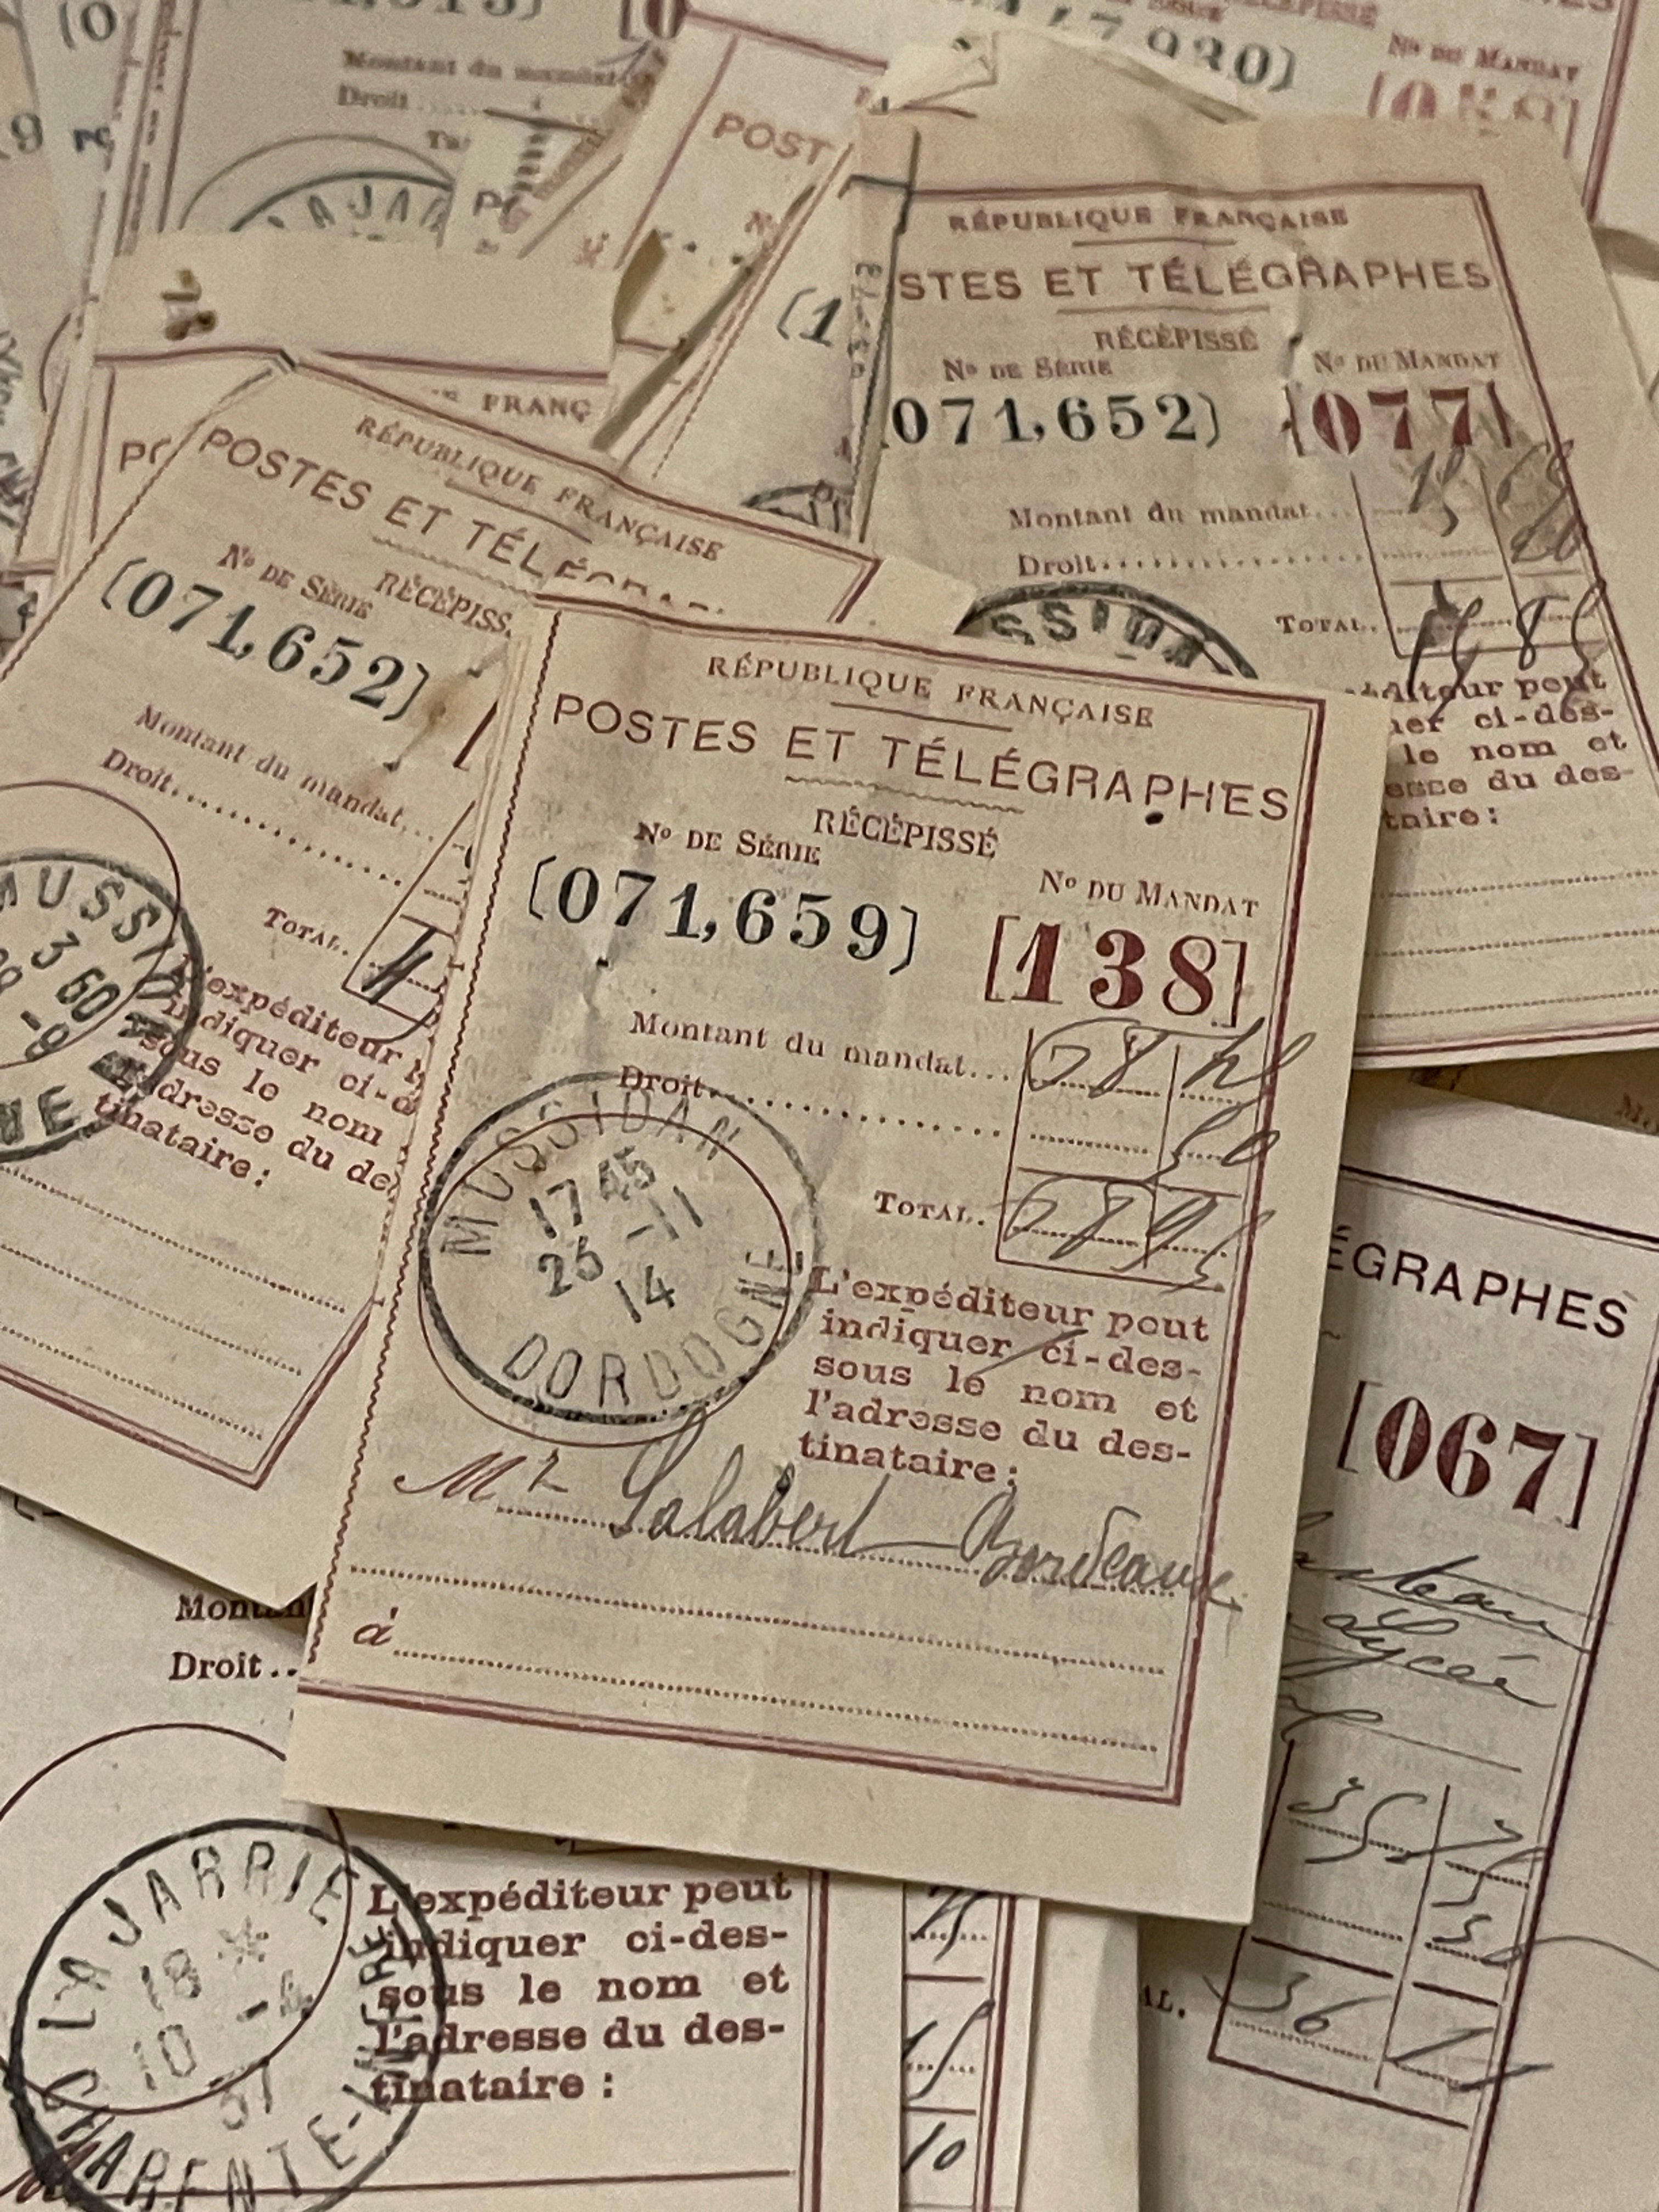 Antique French Telegraph Receipts